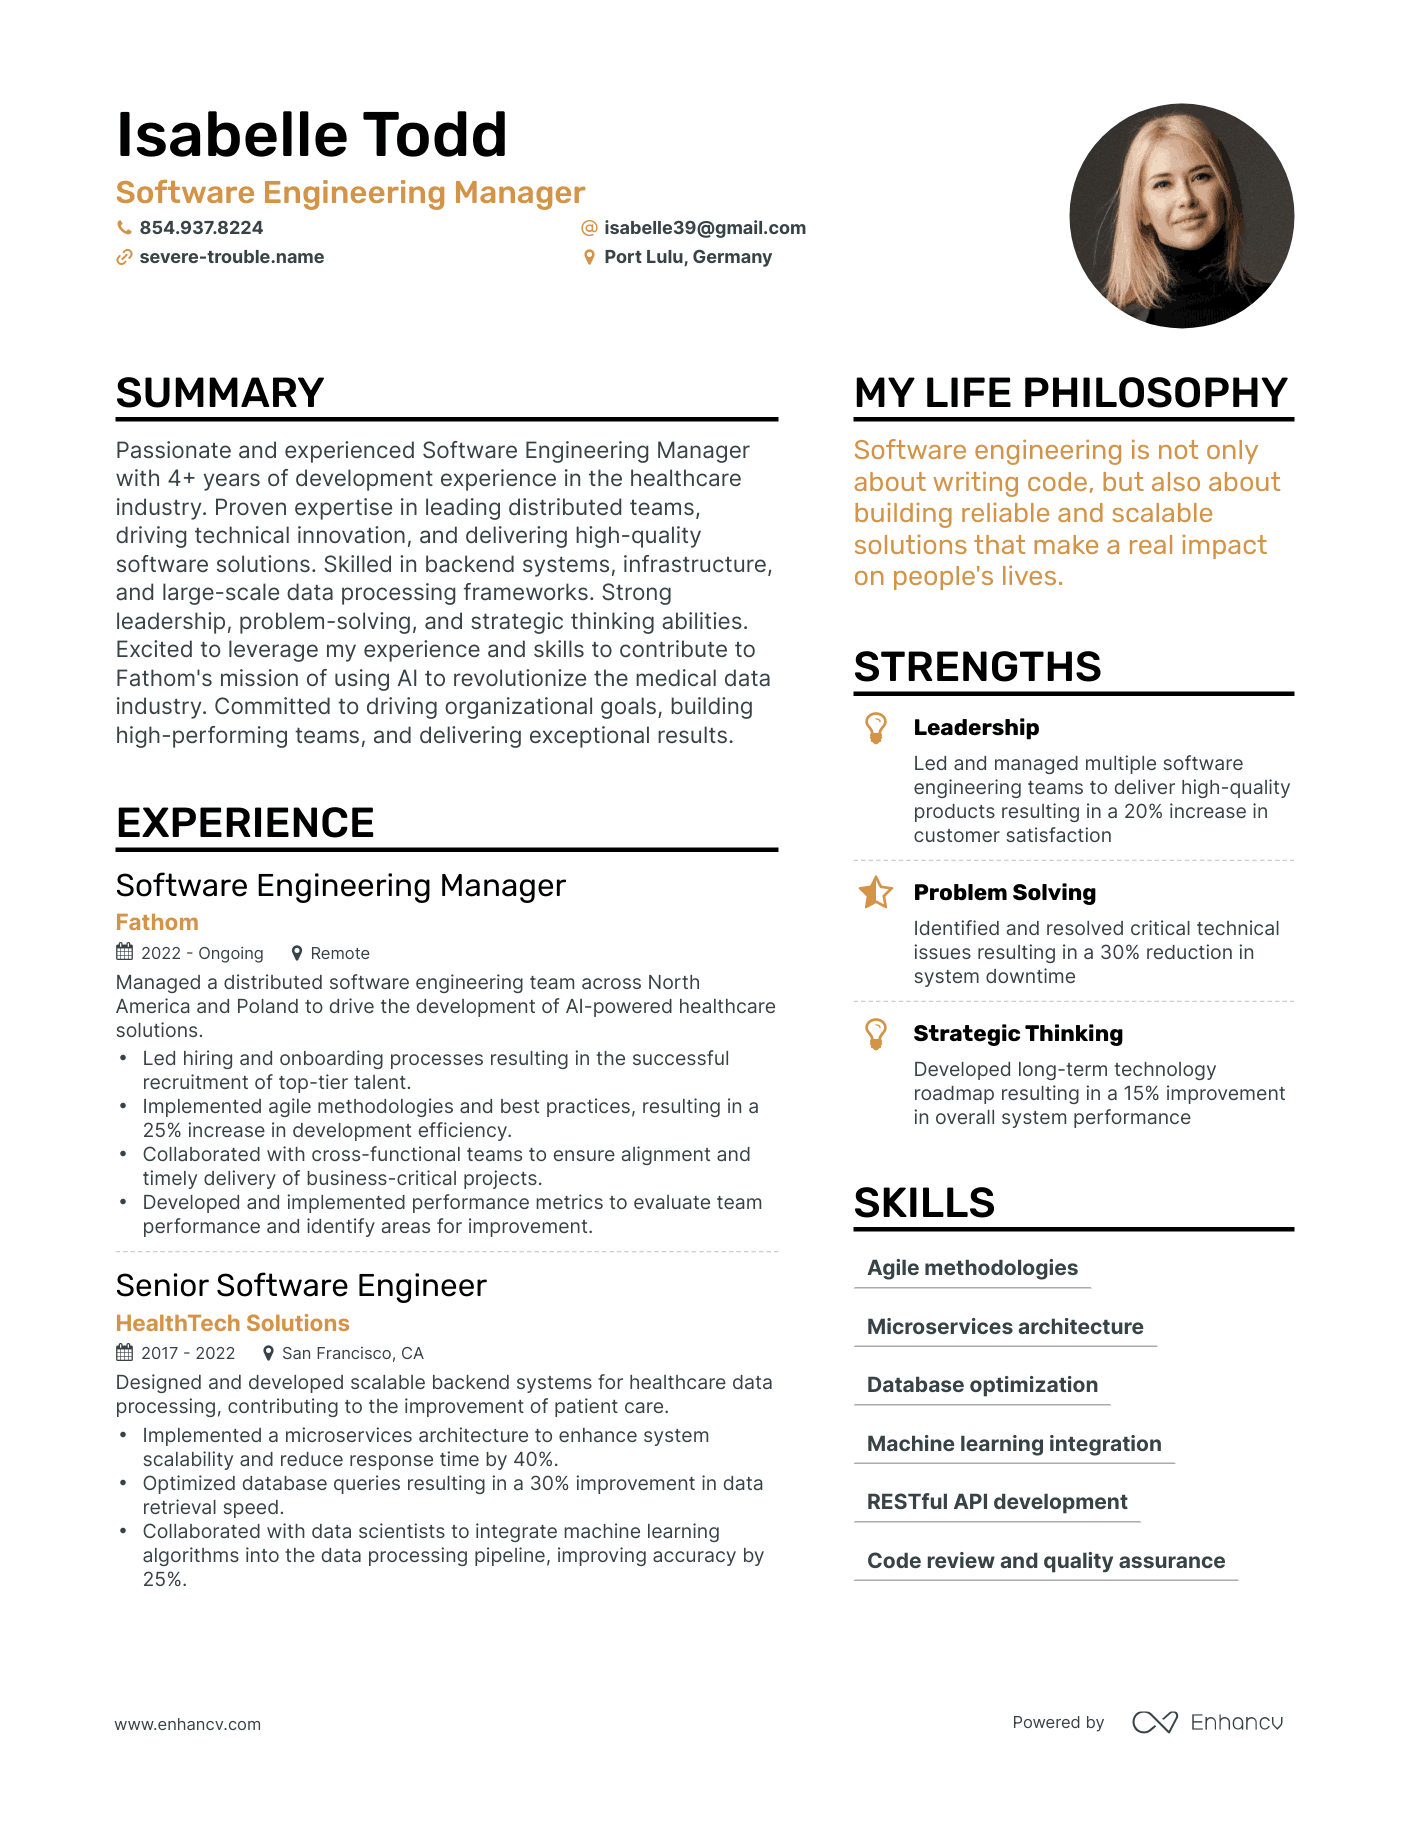 Software Engineering Manager resume example